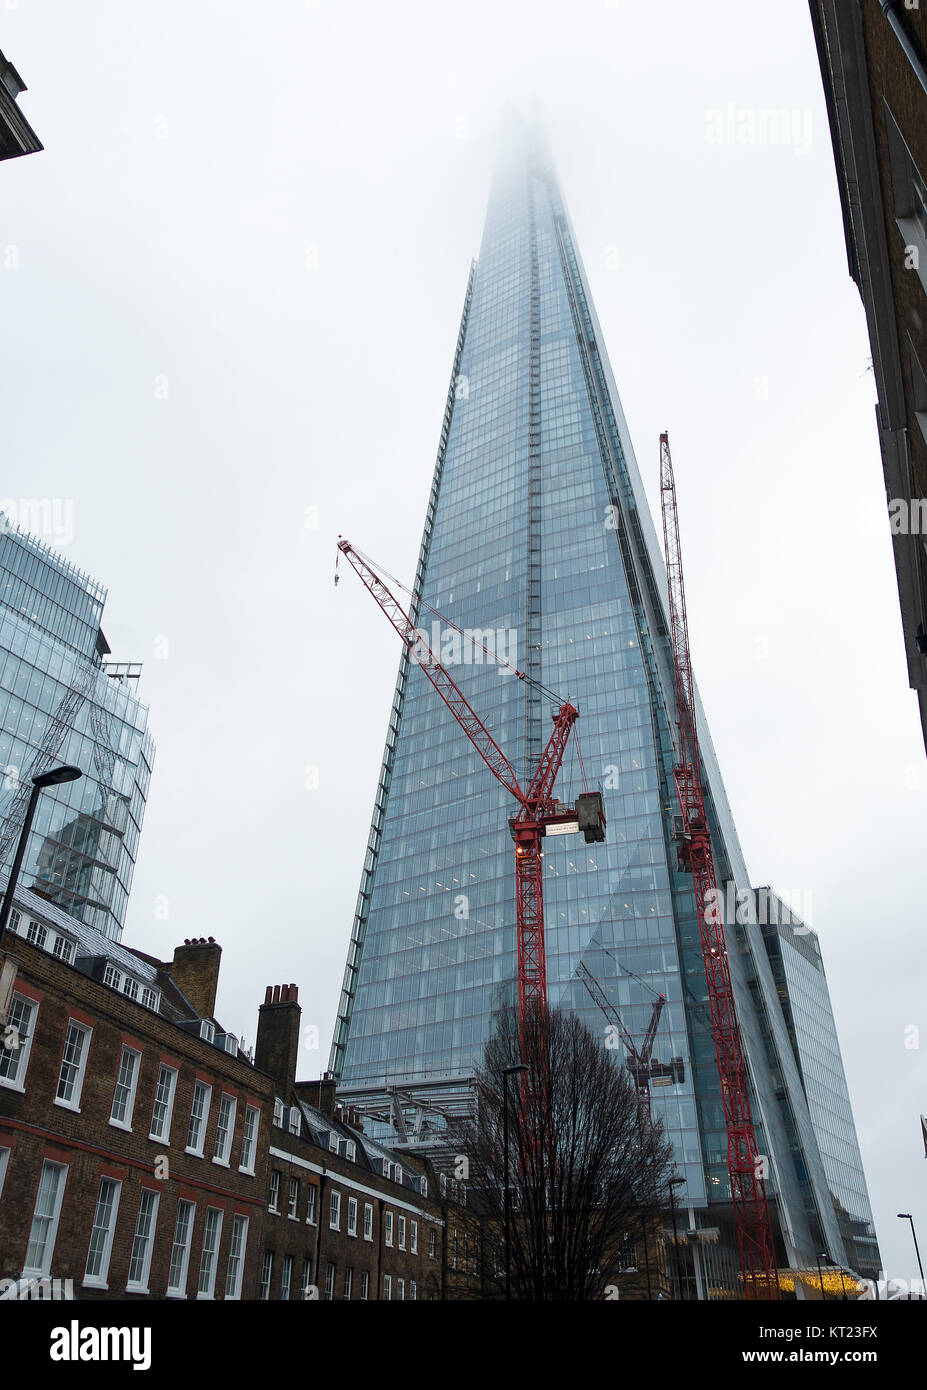 The Shard Skyscraper with its Top in Cloud and a Red Industrial Crane on a Cold Winter Day in December London England United Kingdom UK Stock Photo